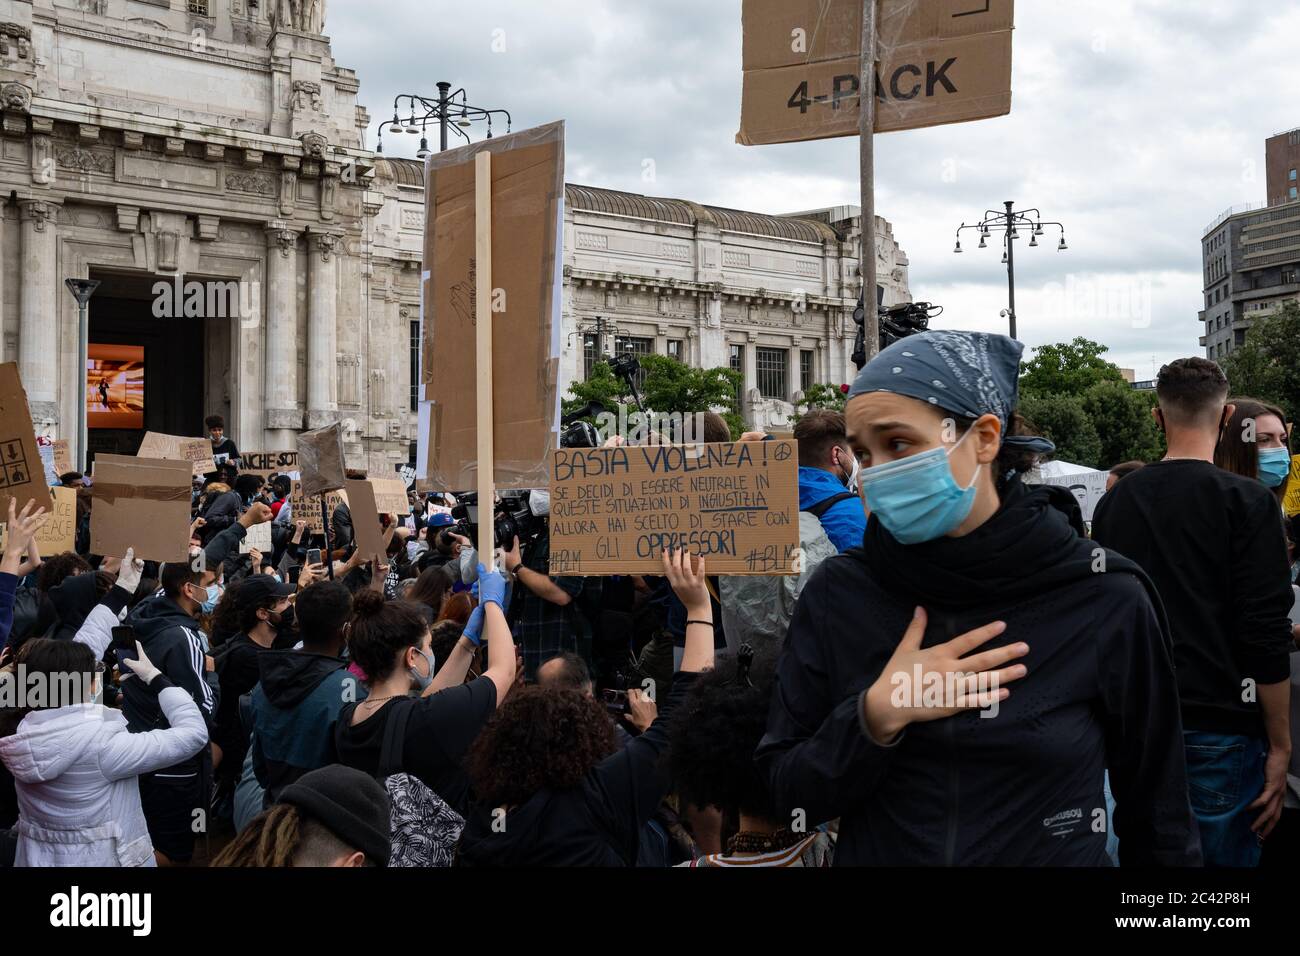 People with placards, one with the words 'Stop Violence' during the protest assembly in solidarity to BLM movement in front of Milan central station, Stock Photo